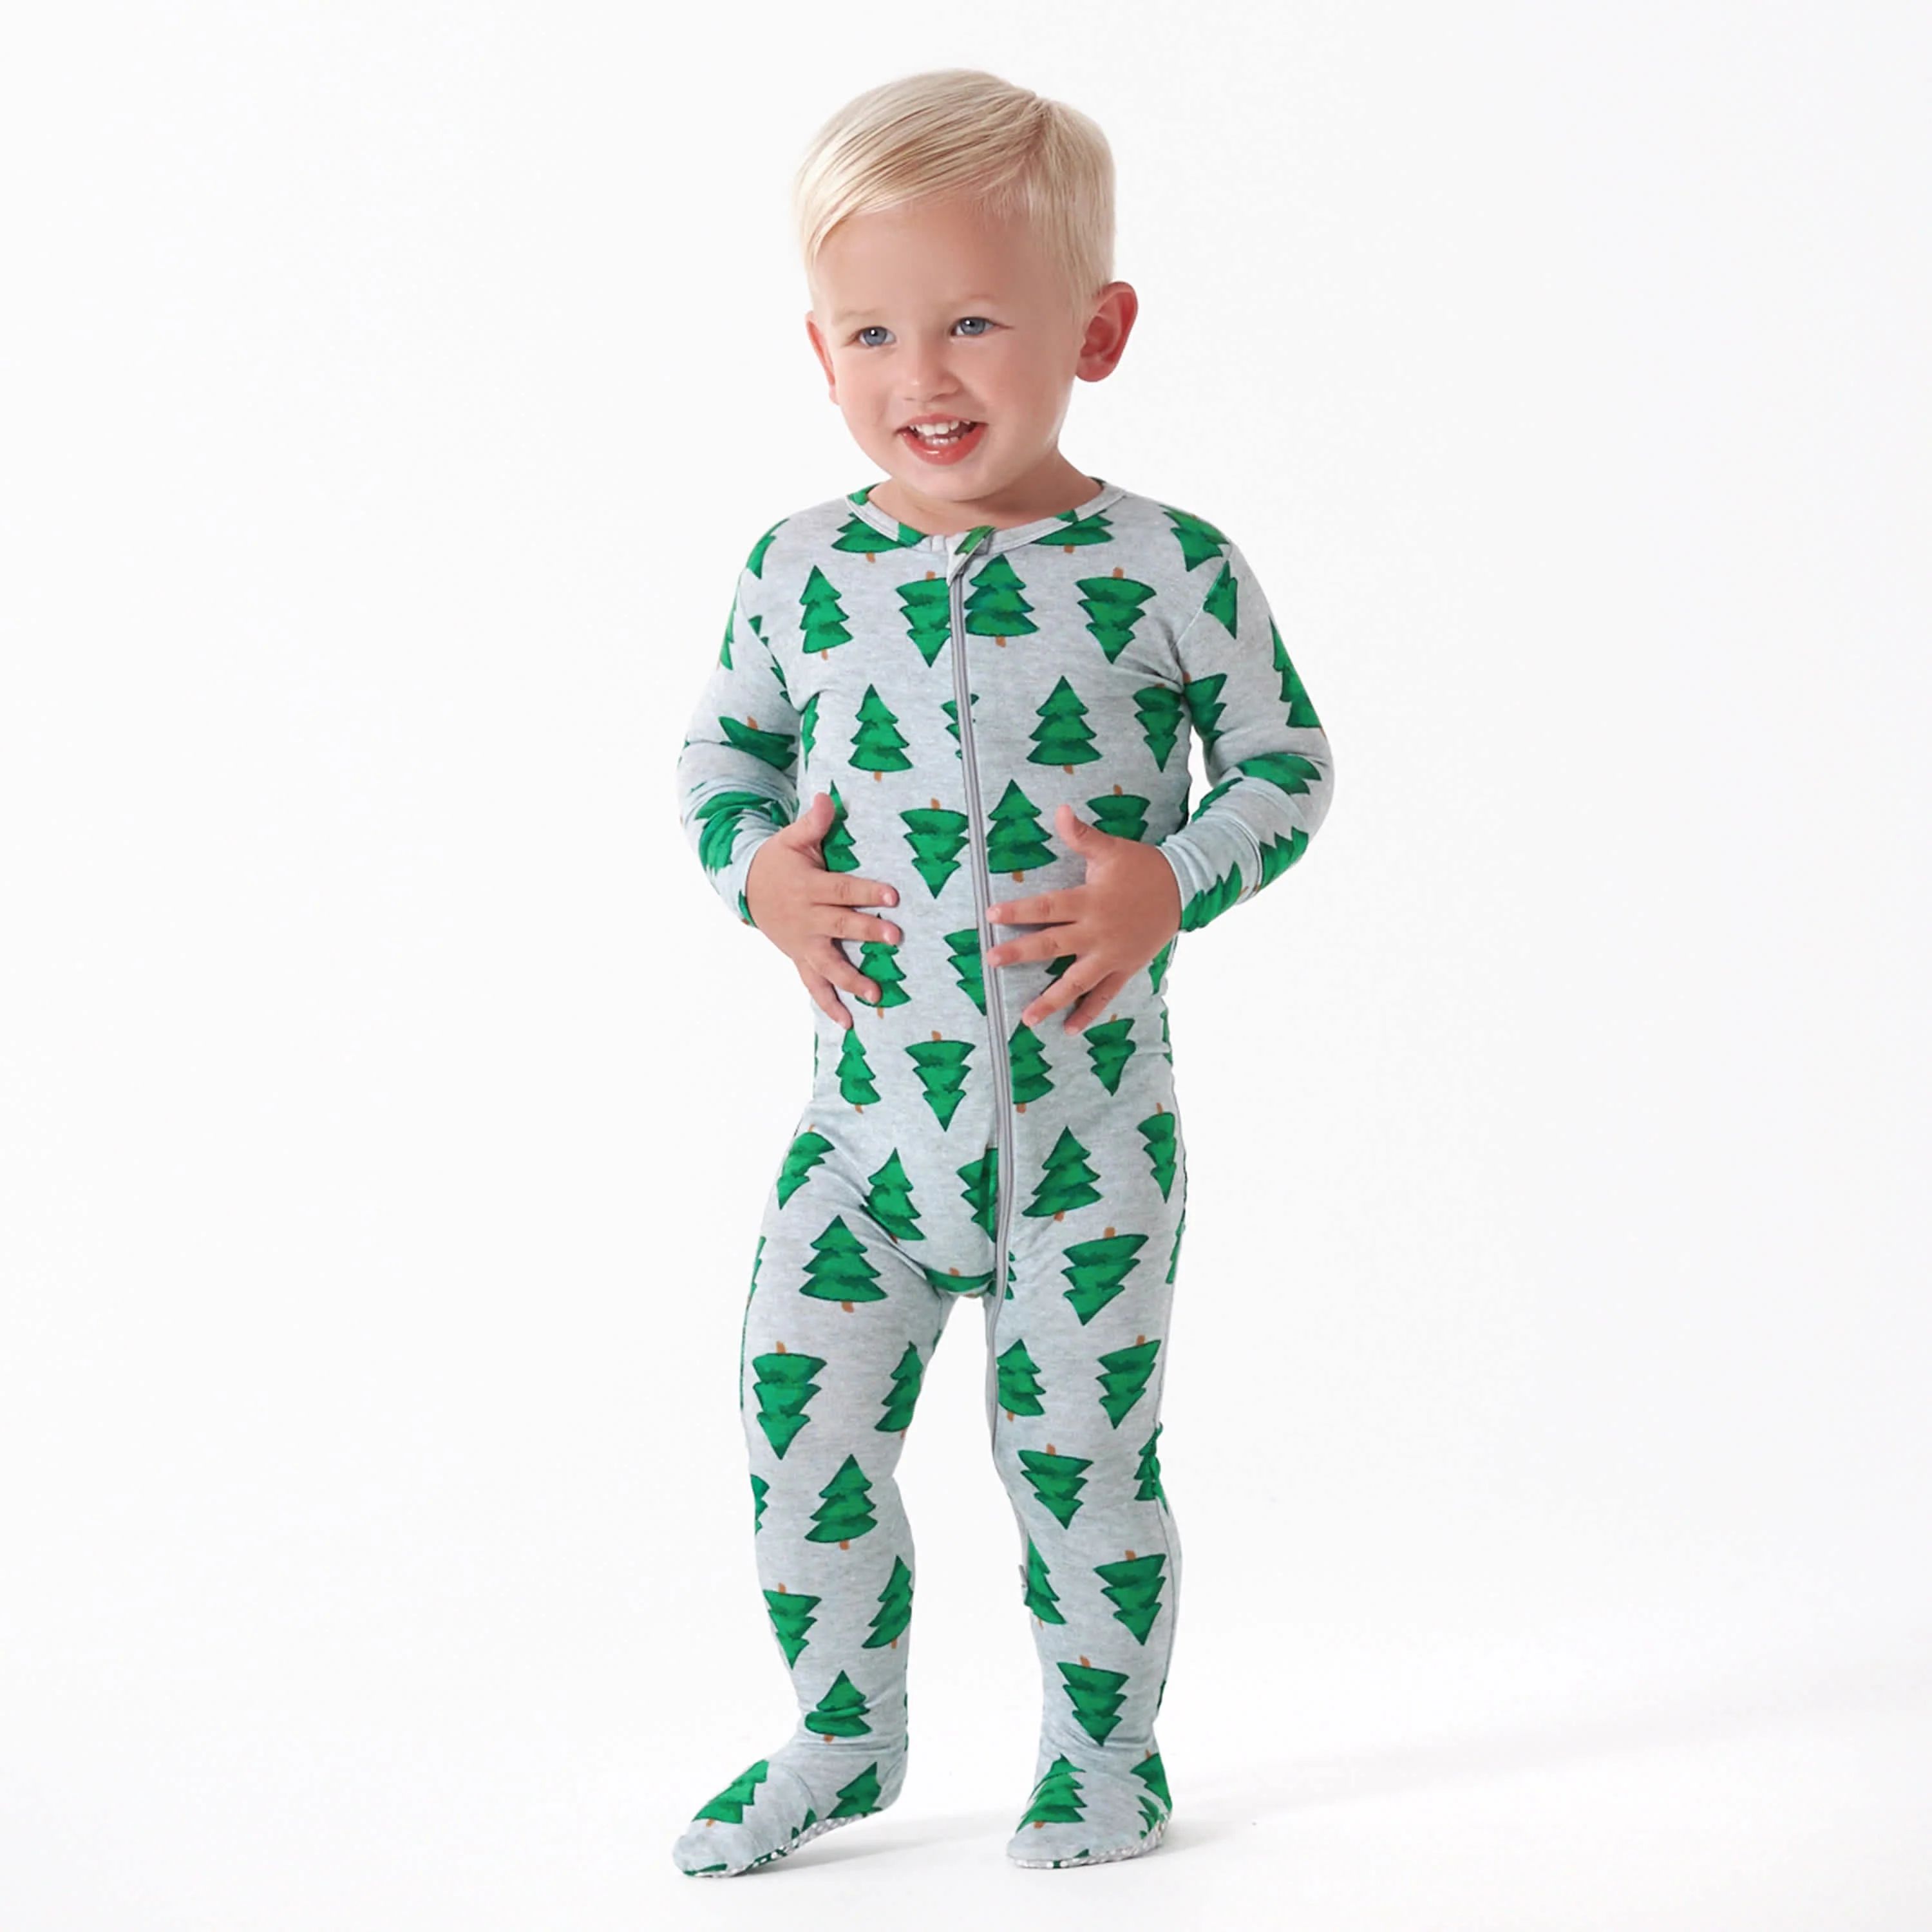 Baby Spruce Buttery Soft Viscose Made from Eucalyptus Snug Fit Footed Holiday Pajamas | Gerber Childrenswear